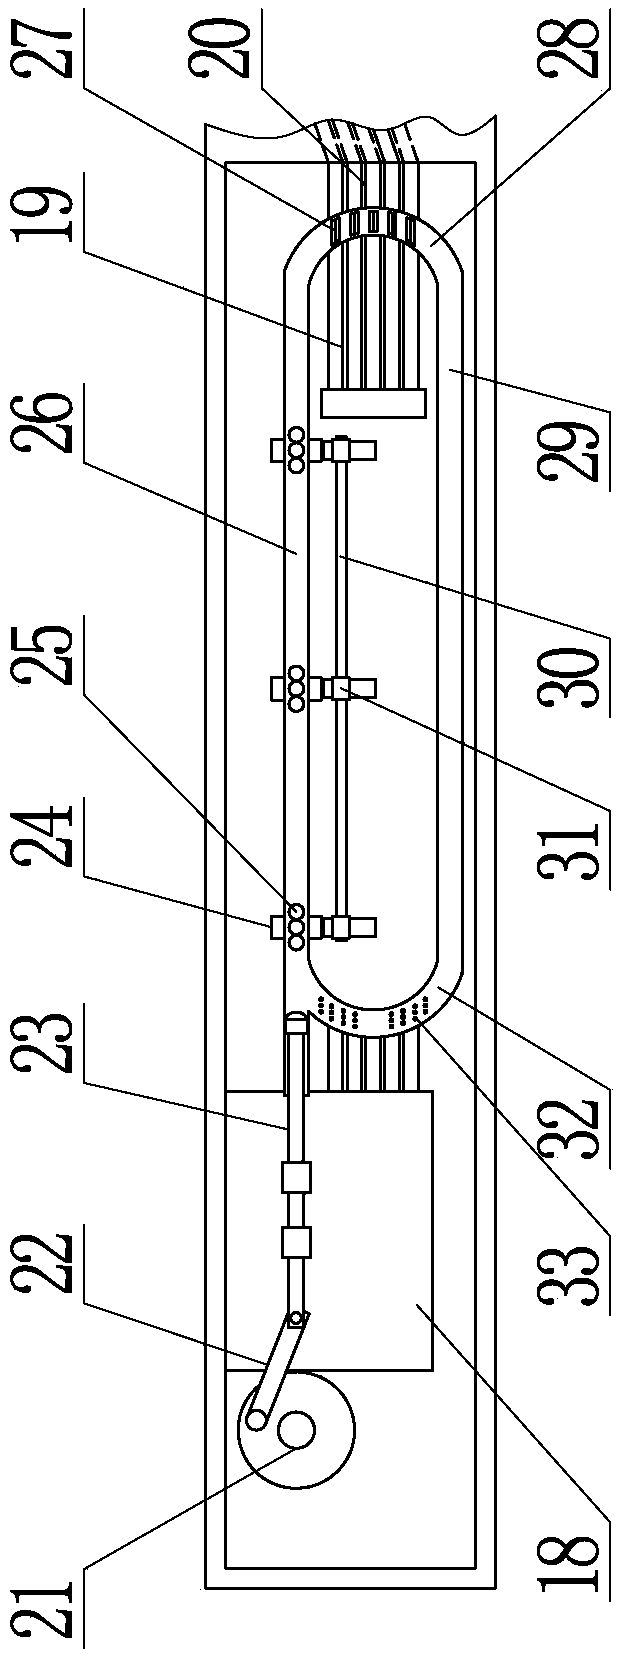 A plastic beating processing device capable of preventing sticking and sticking materials